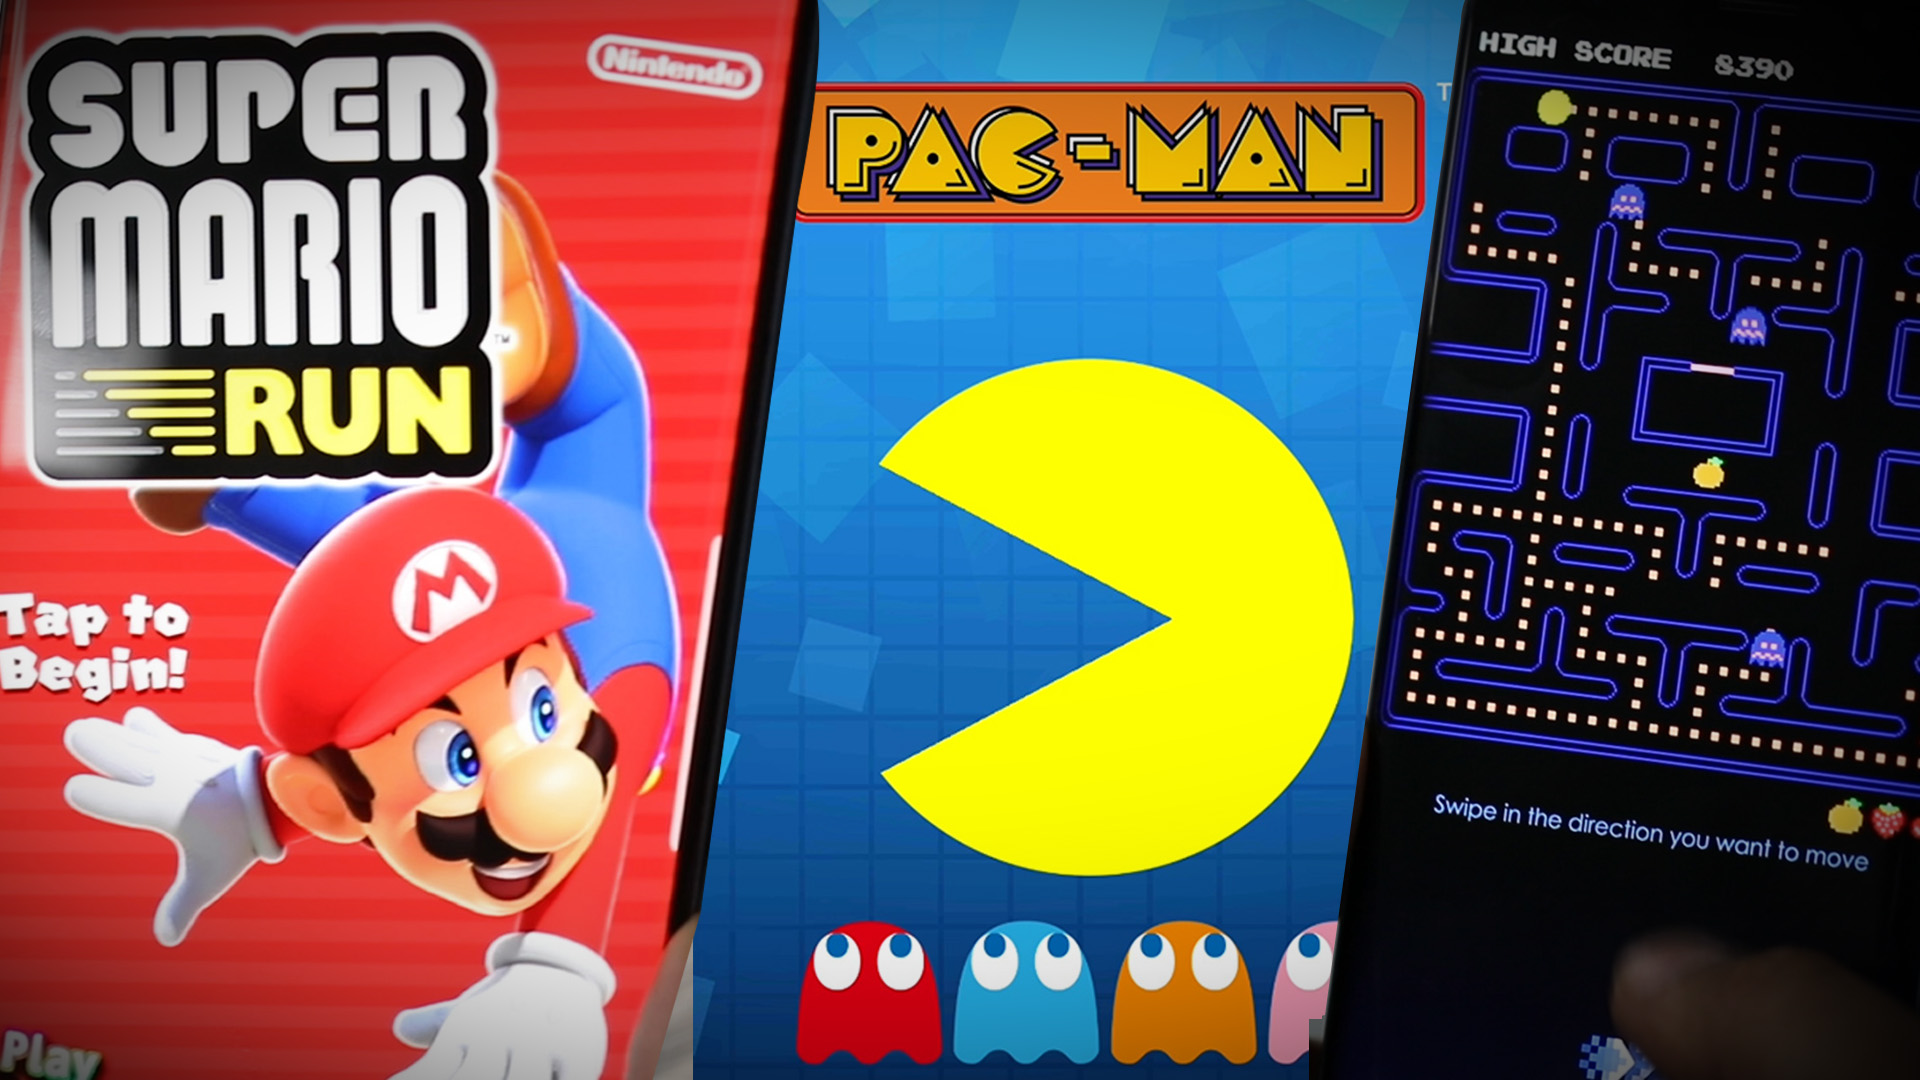 Classic '90s Games On Android - Pacman , HD Wallpaper & Backgrounds